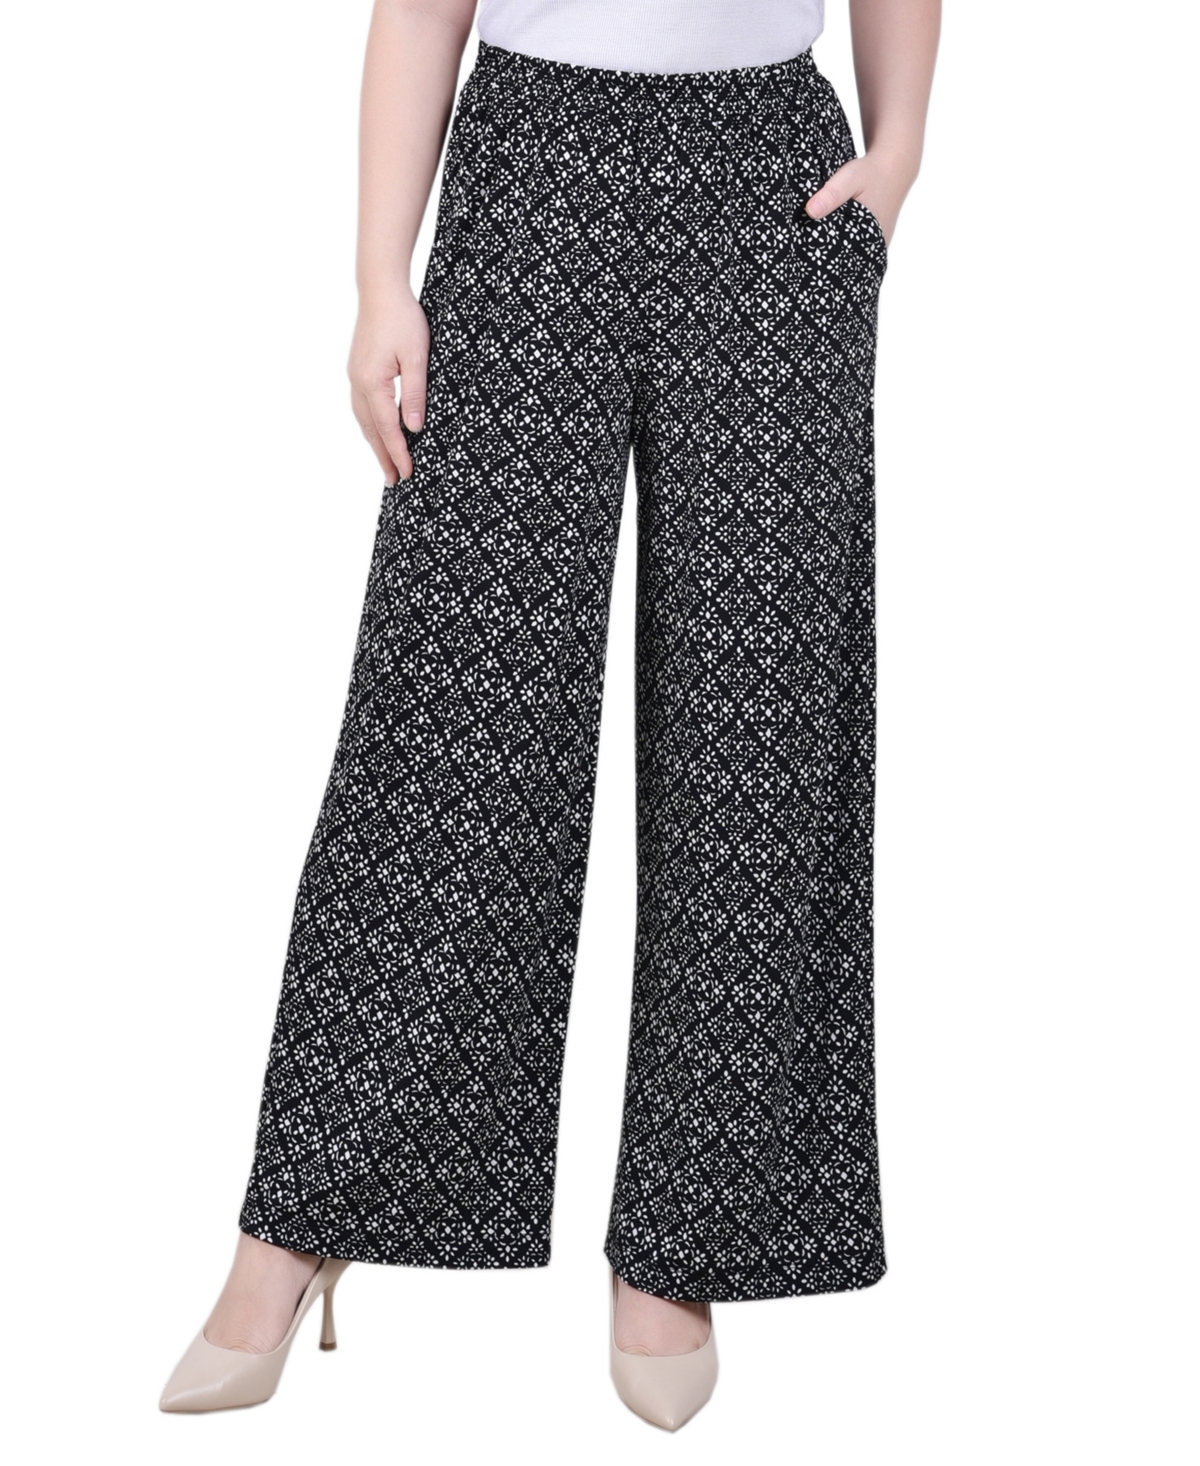 Ny Collection Petite Wide Leg Pull On Pants In Black White Geo